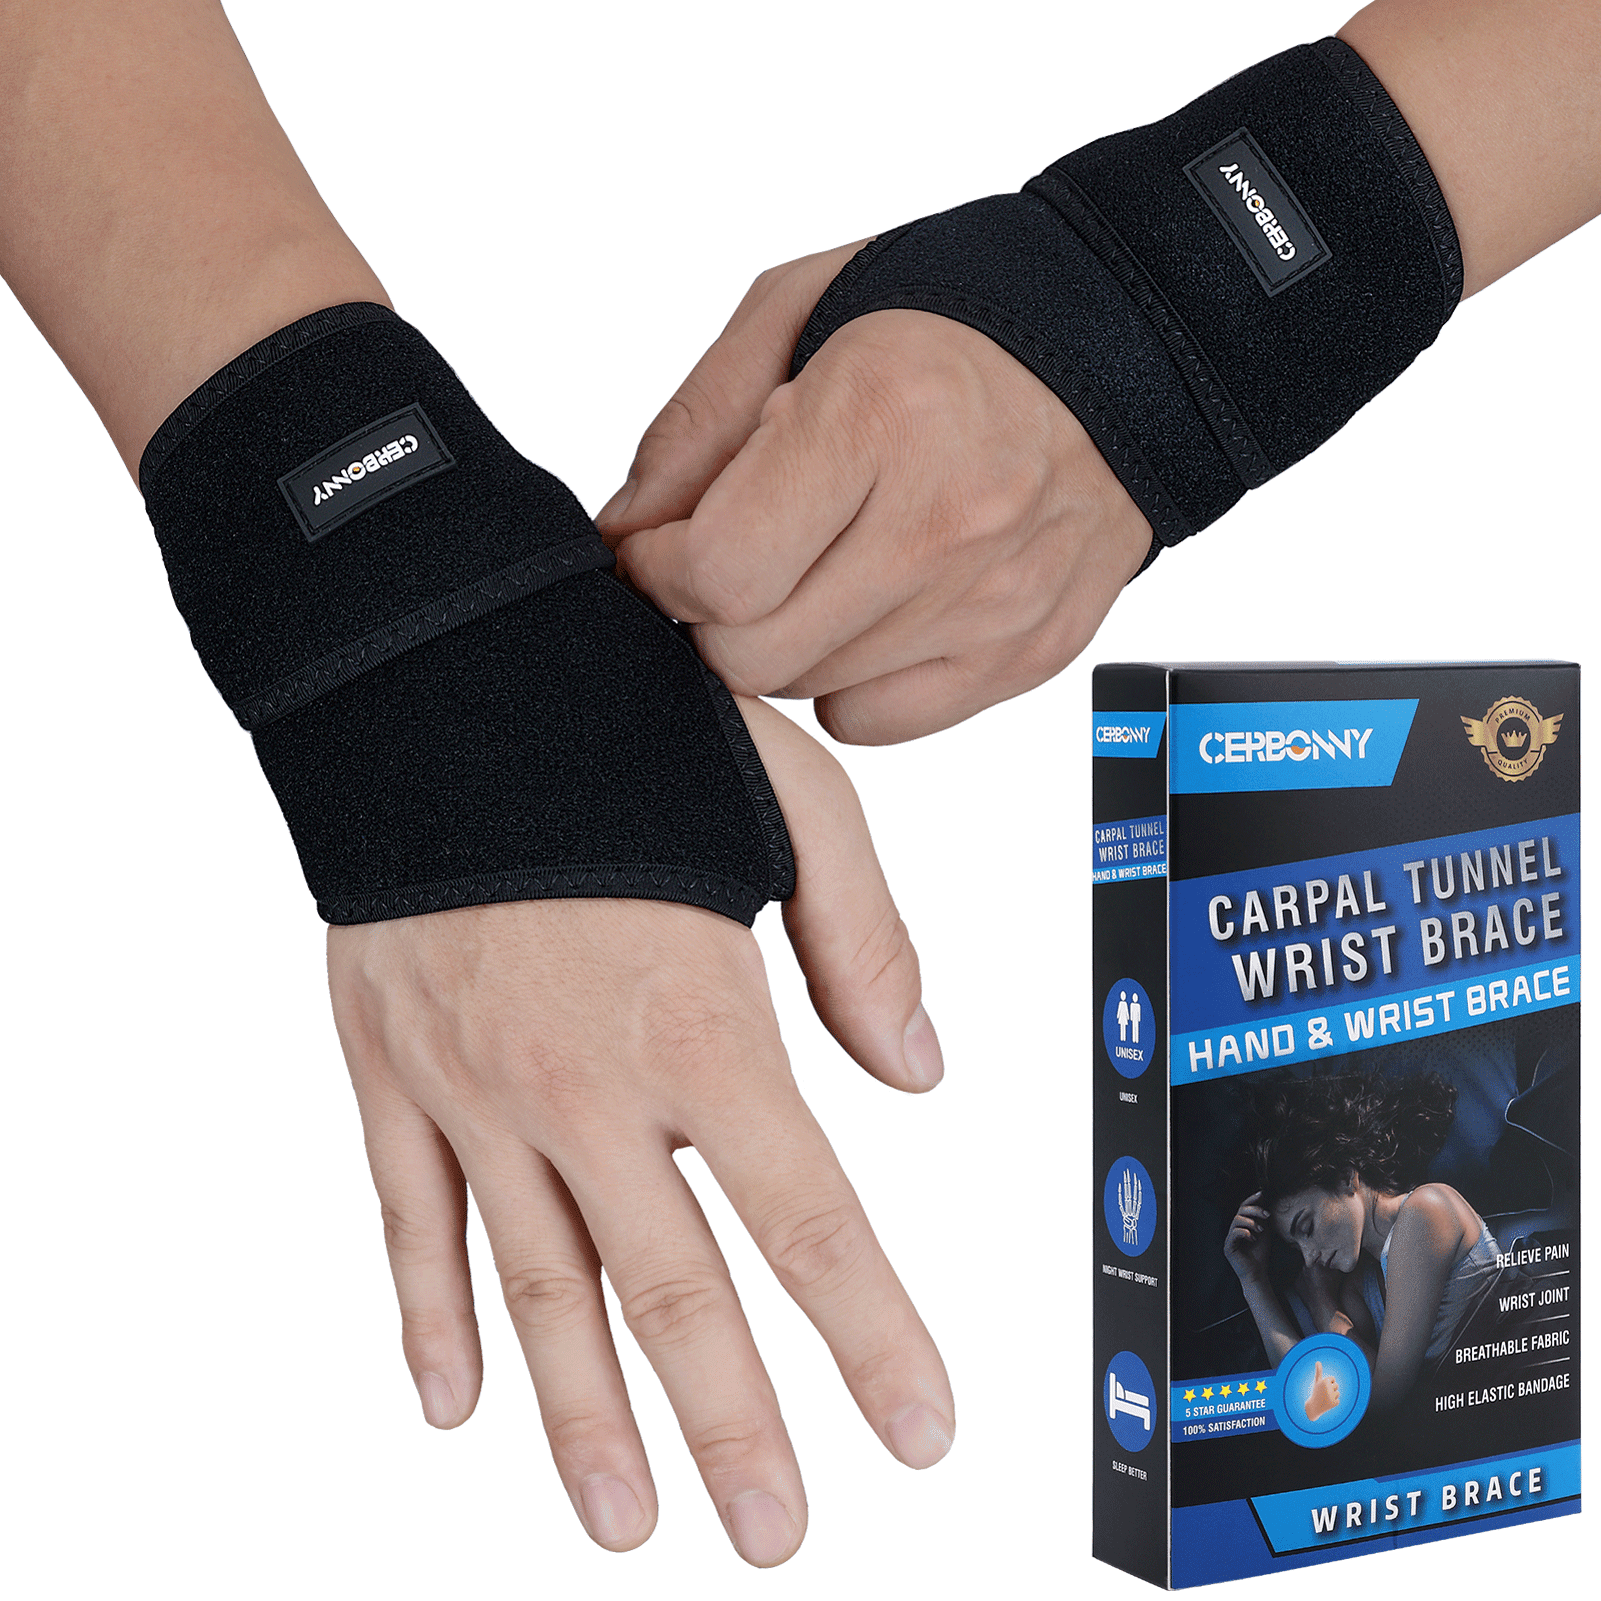 Wrist Brace for Carpal Tunnel, Adjustable Wrist Support Brace with Splints  Right Hand, Small/Medium, Arm Compression Hand Support for Injuries, Wrist